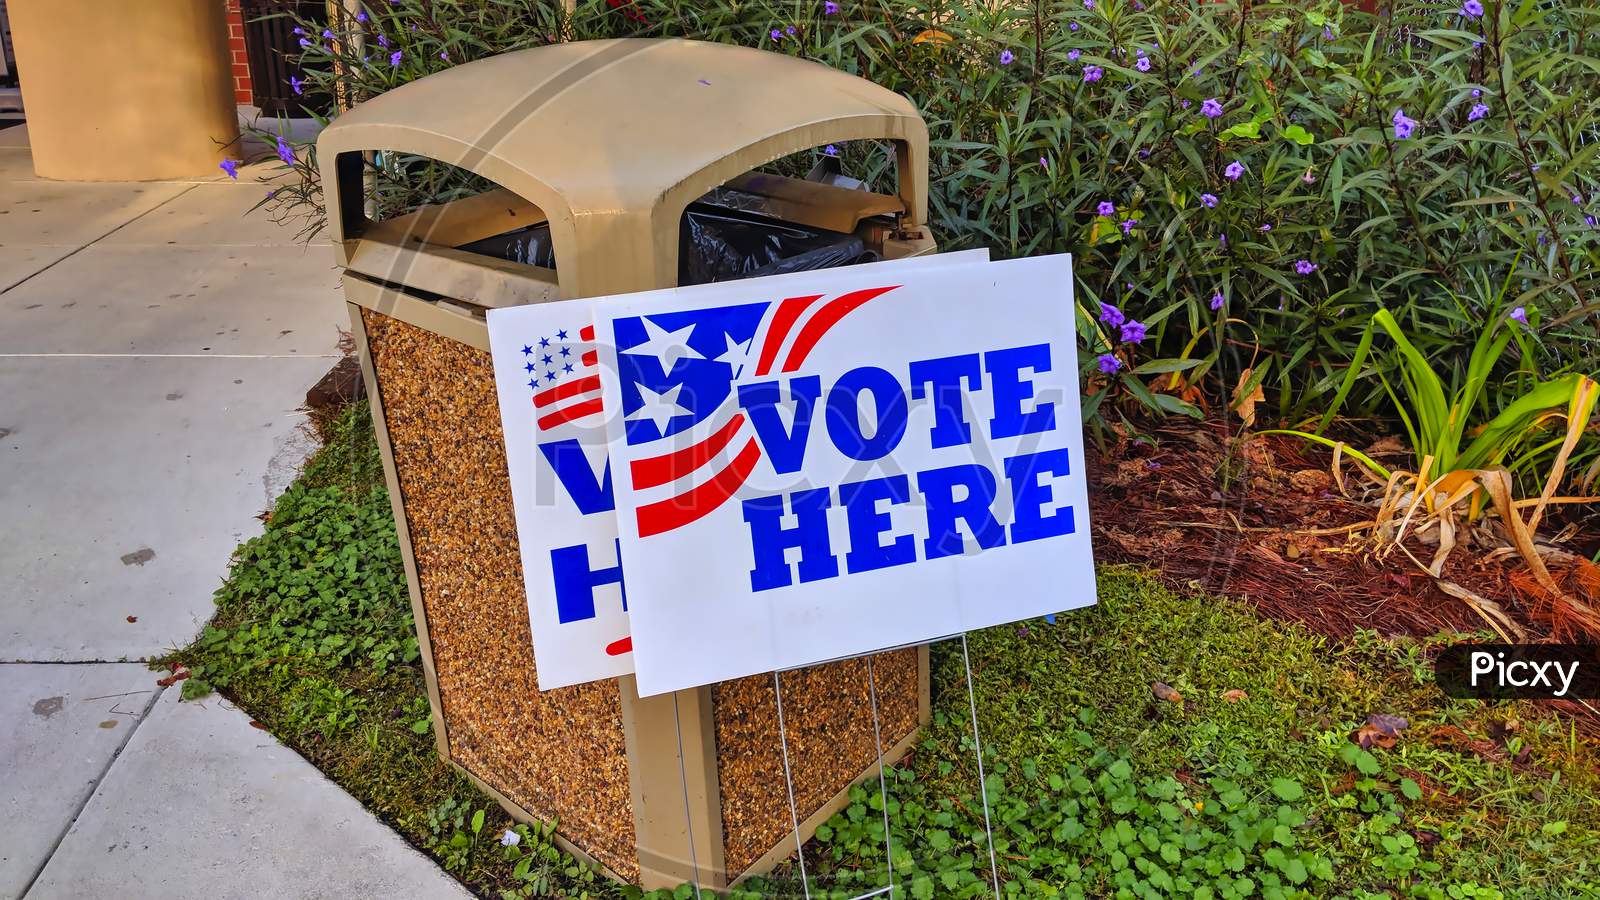 Garbage can Ballot Box with vote here sign